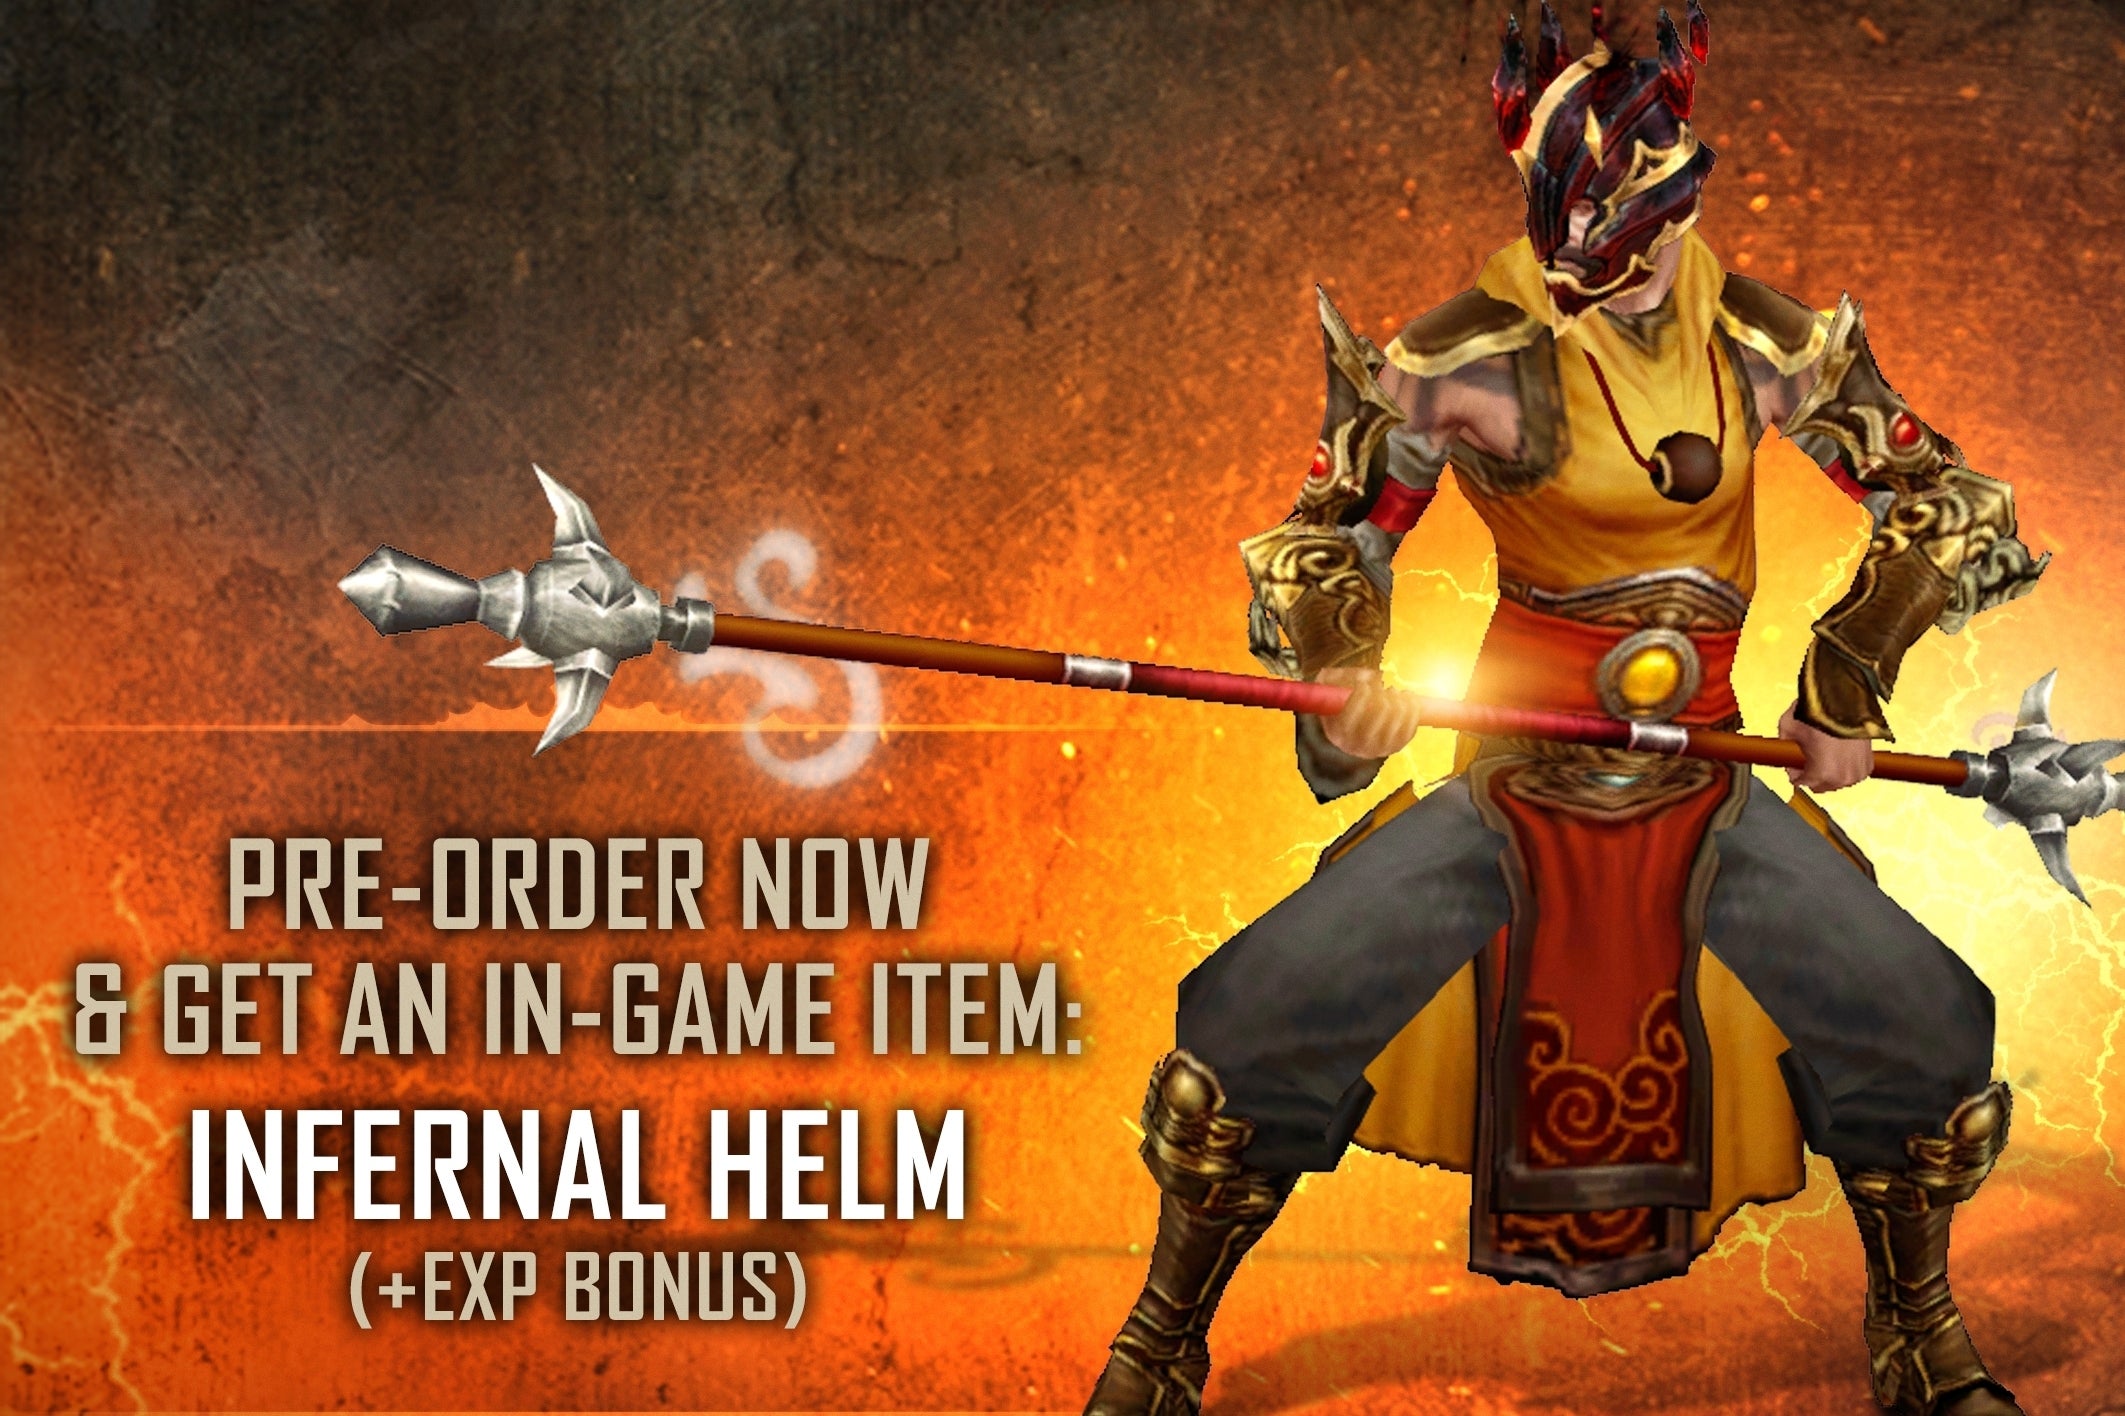 Image for Pre-order Diablo 3 on PS3 and you'll get an XP boosting helm